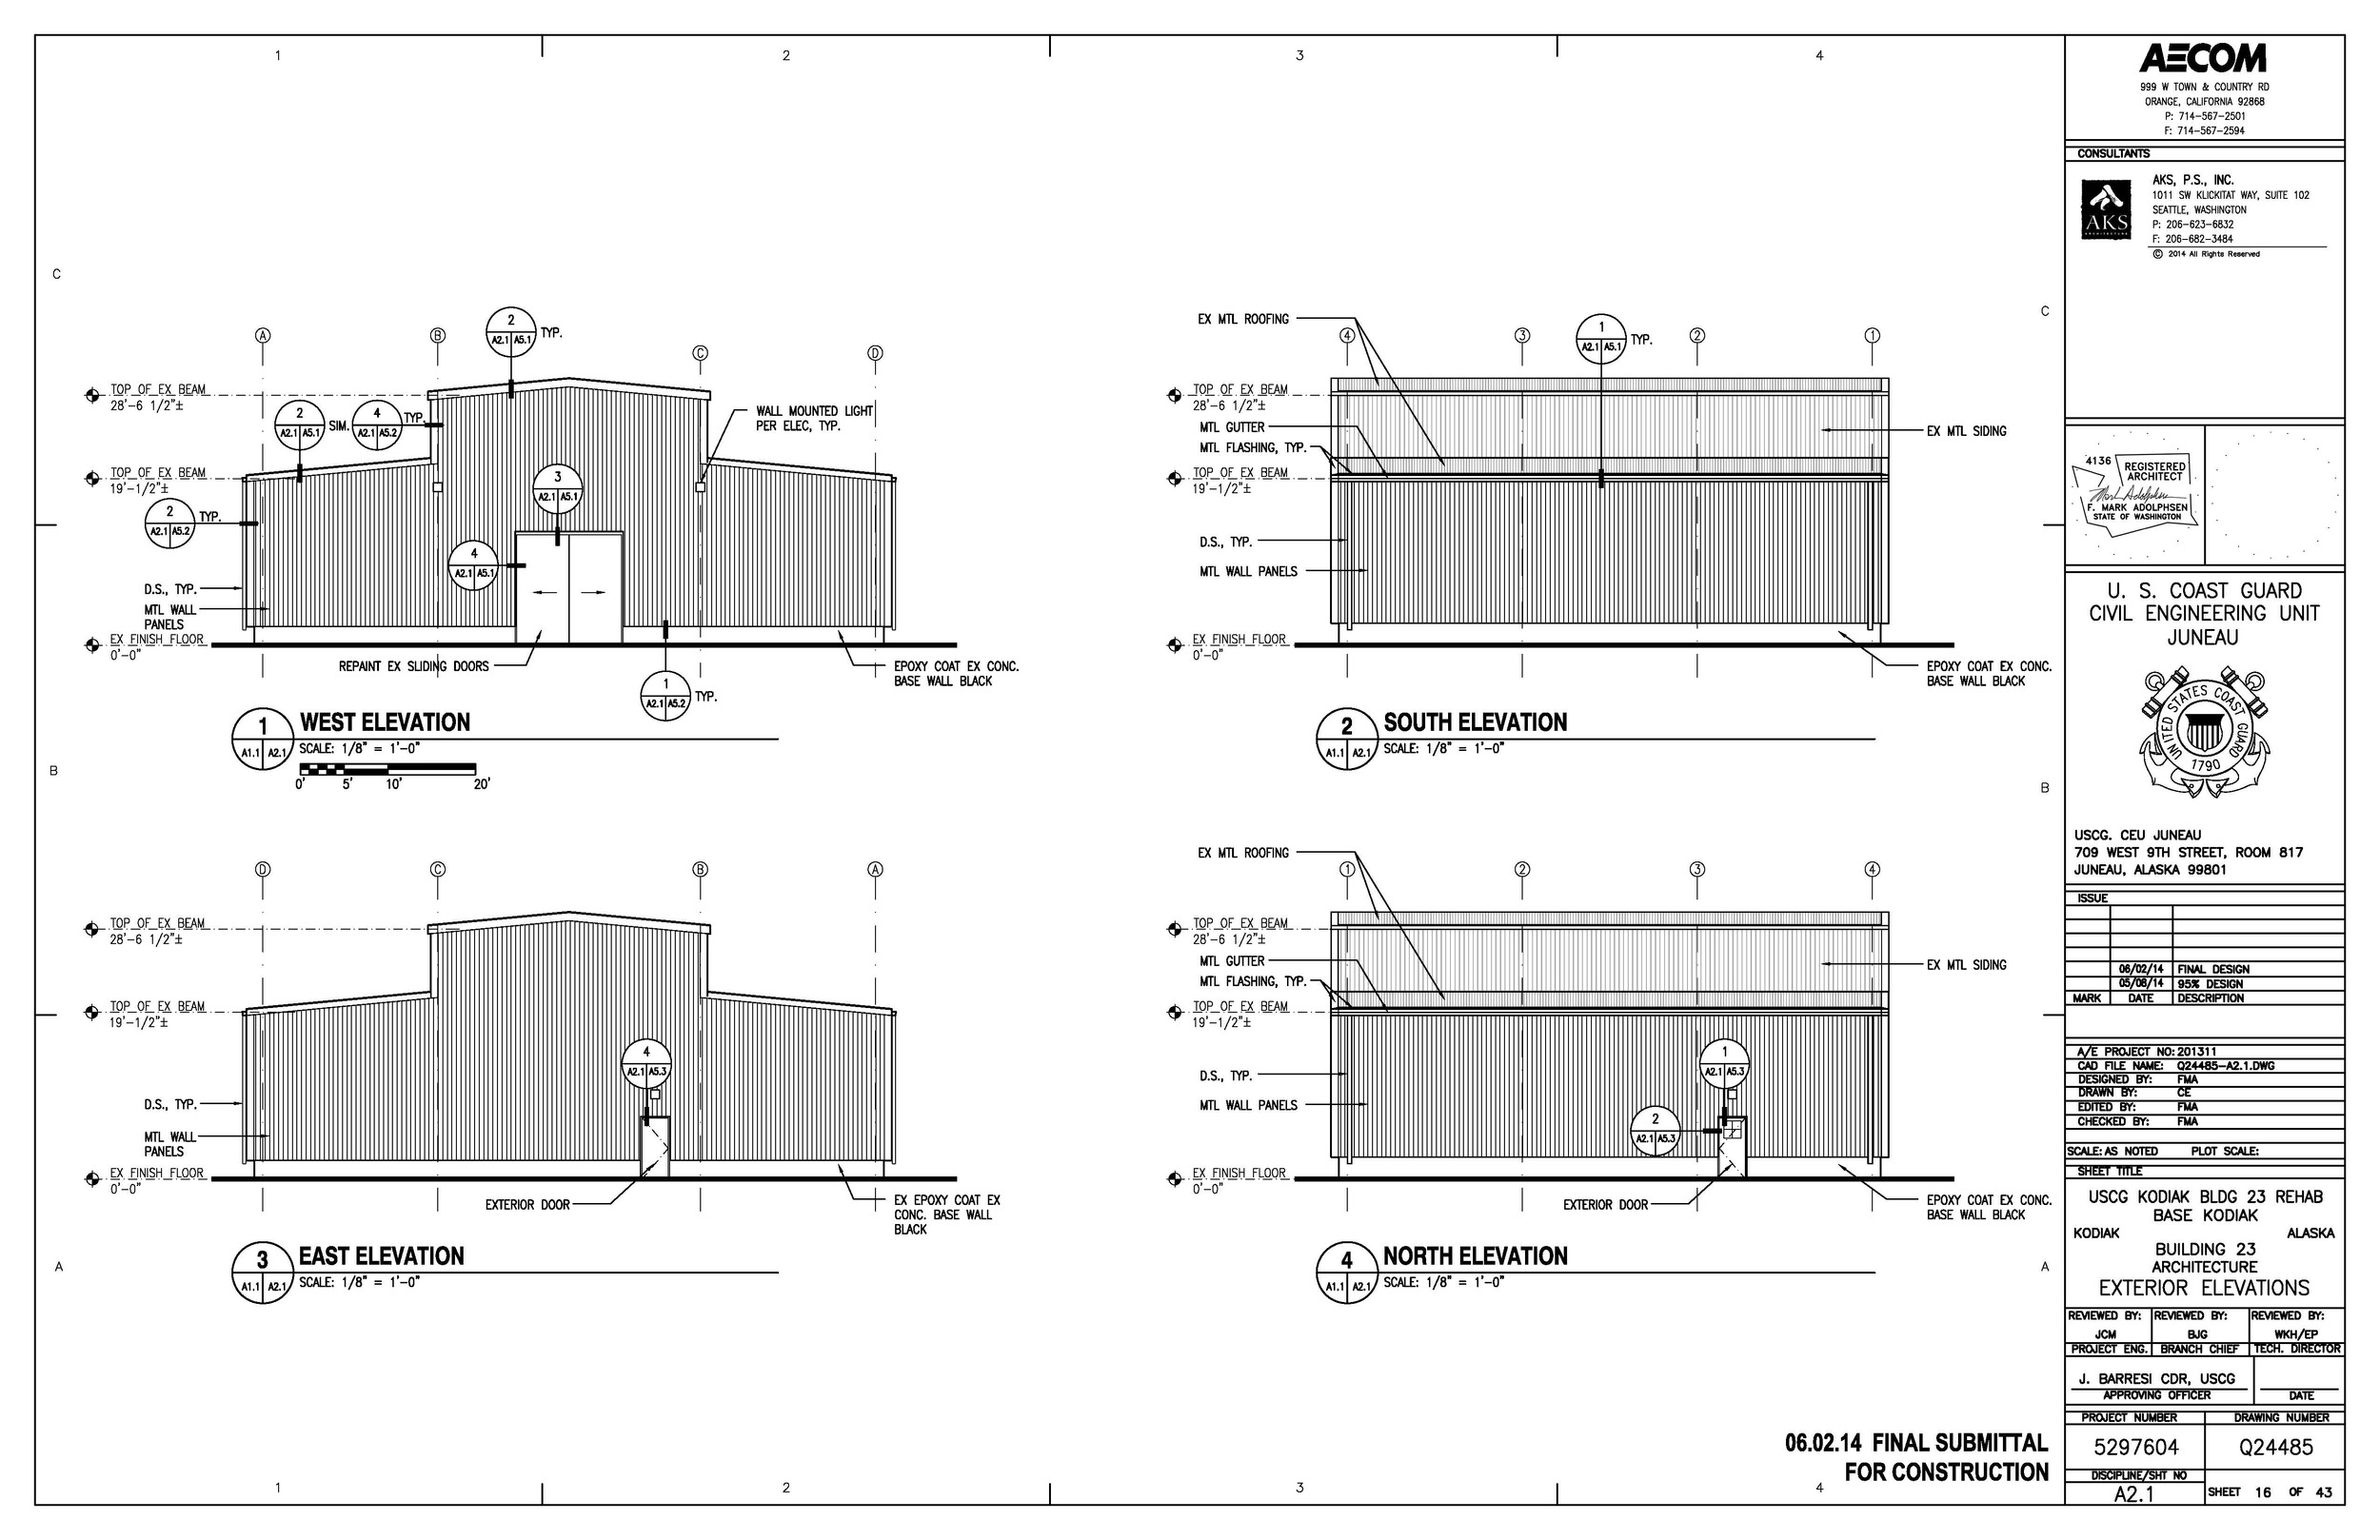 Building 23 Proposed Elevations